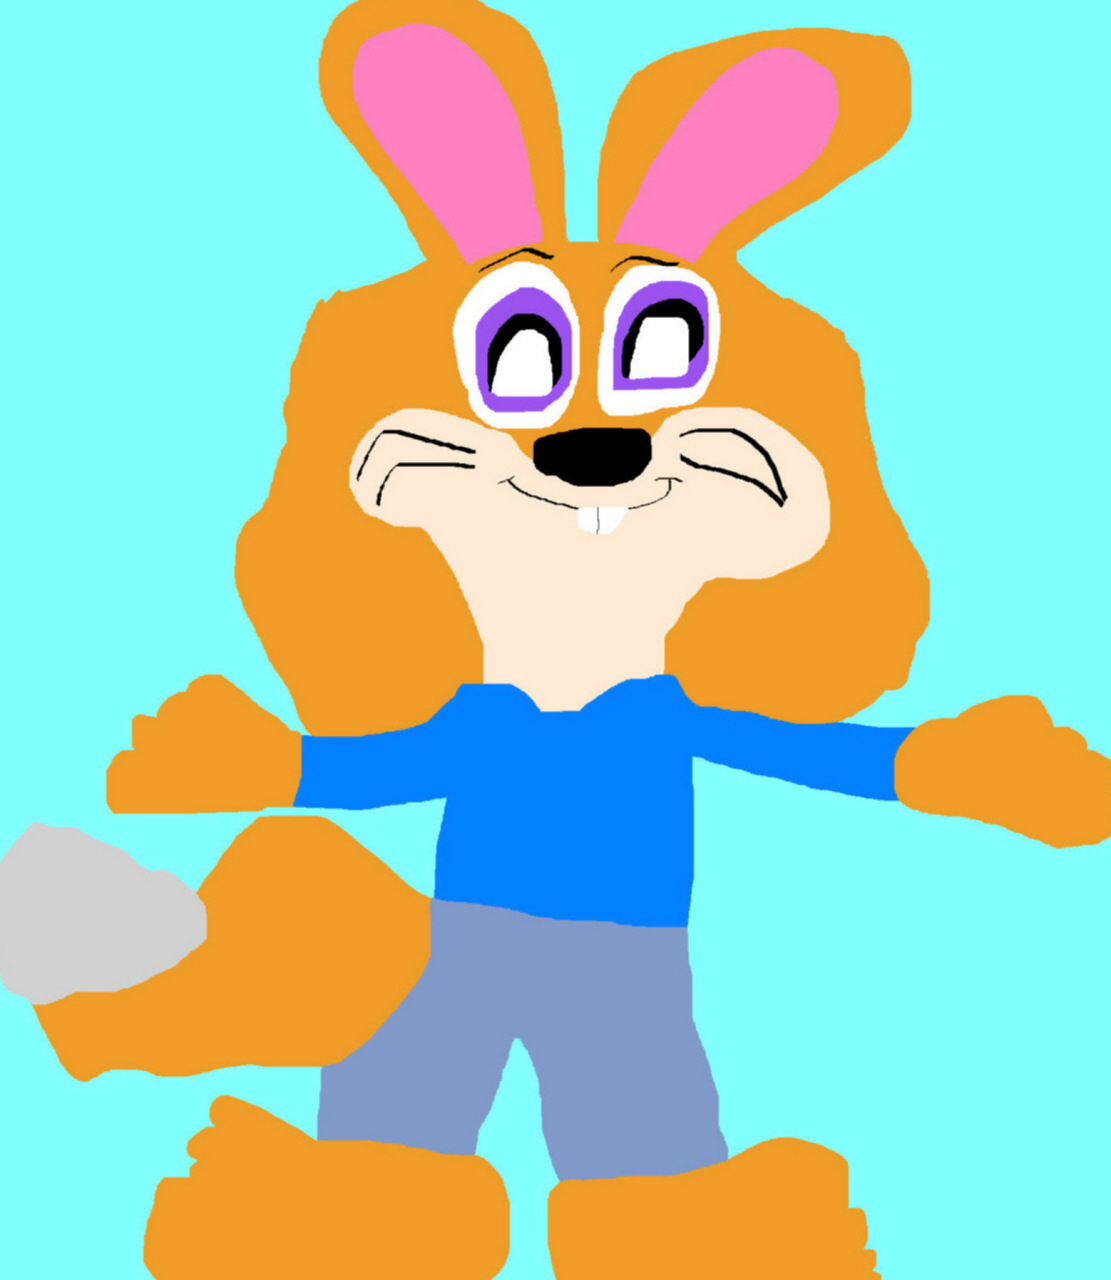 Nick And Judy Offspring Attempt MS Paint I Was Bored by Falconlobo